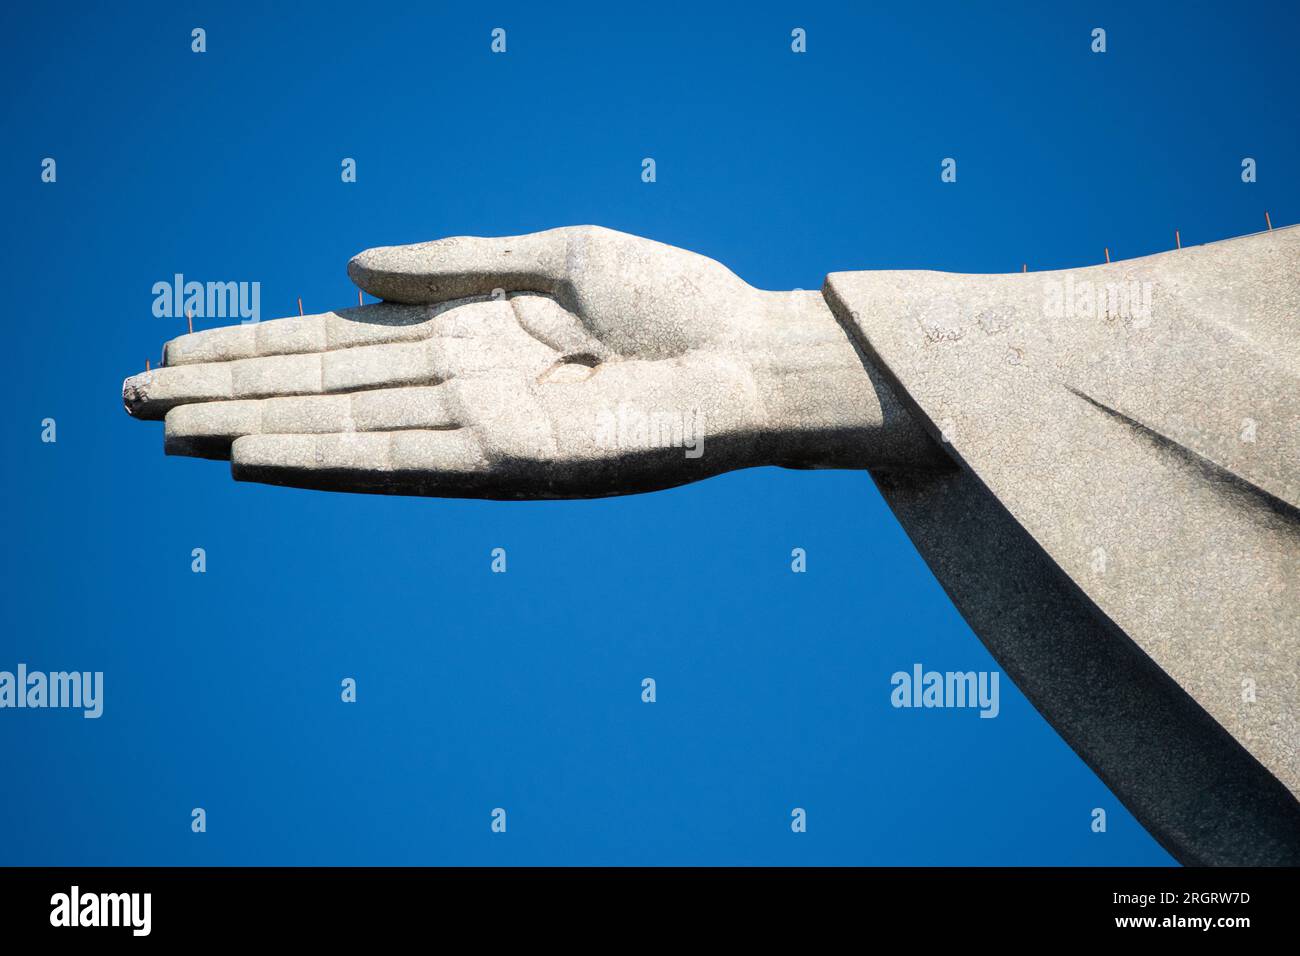 The statue of Christ the redeemer with open arms Stock Photo - Alamy